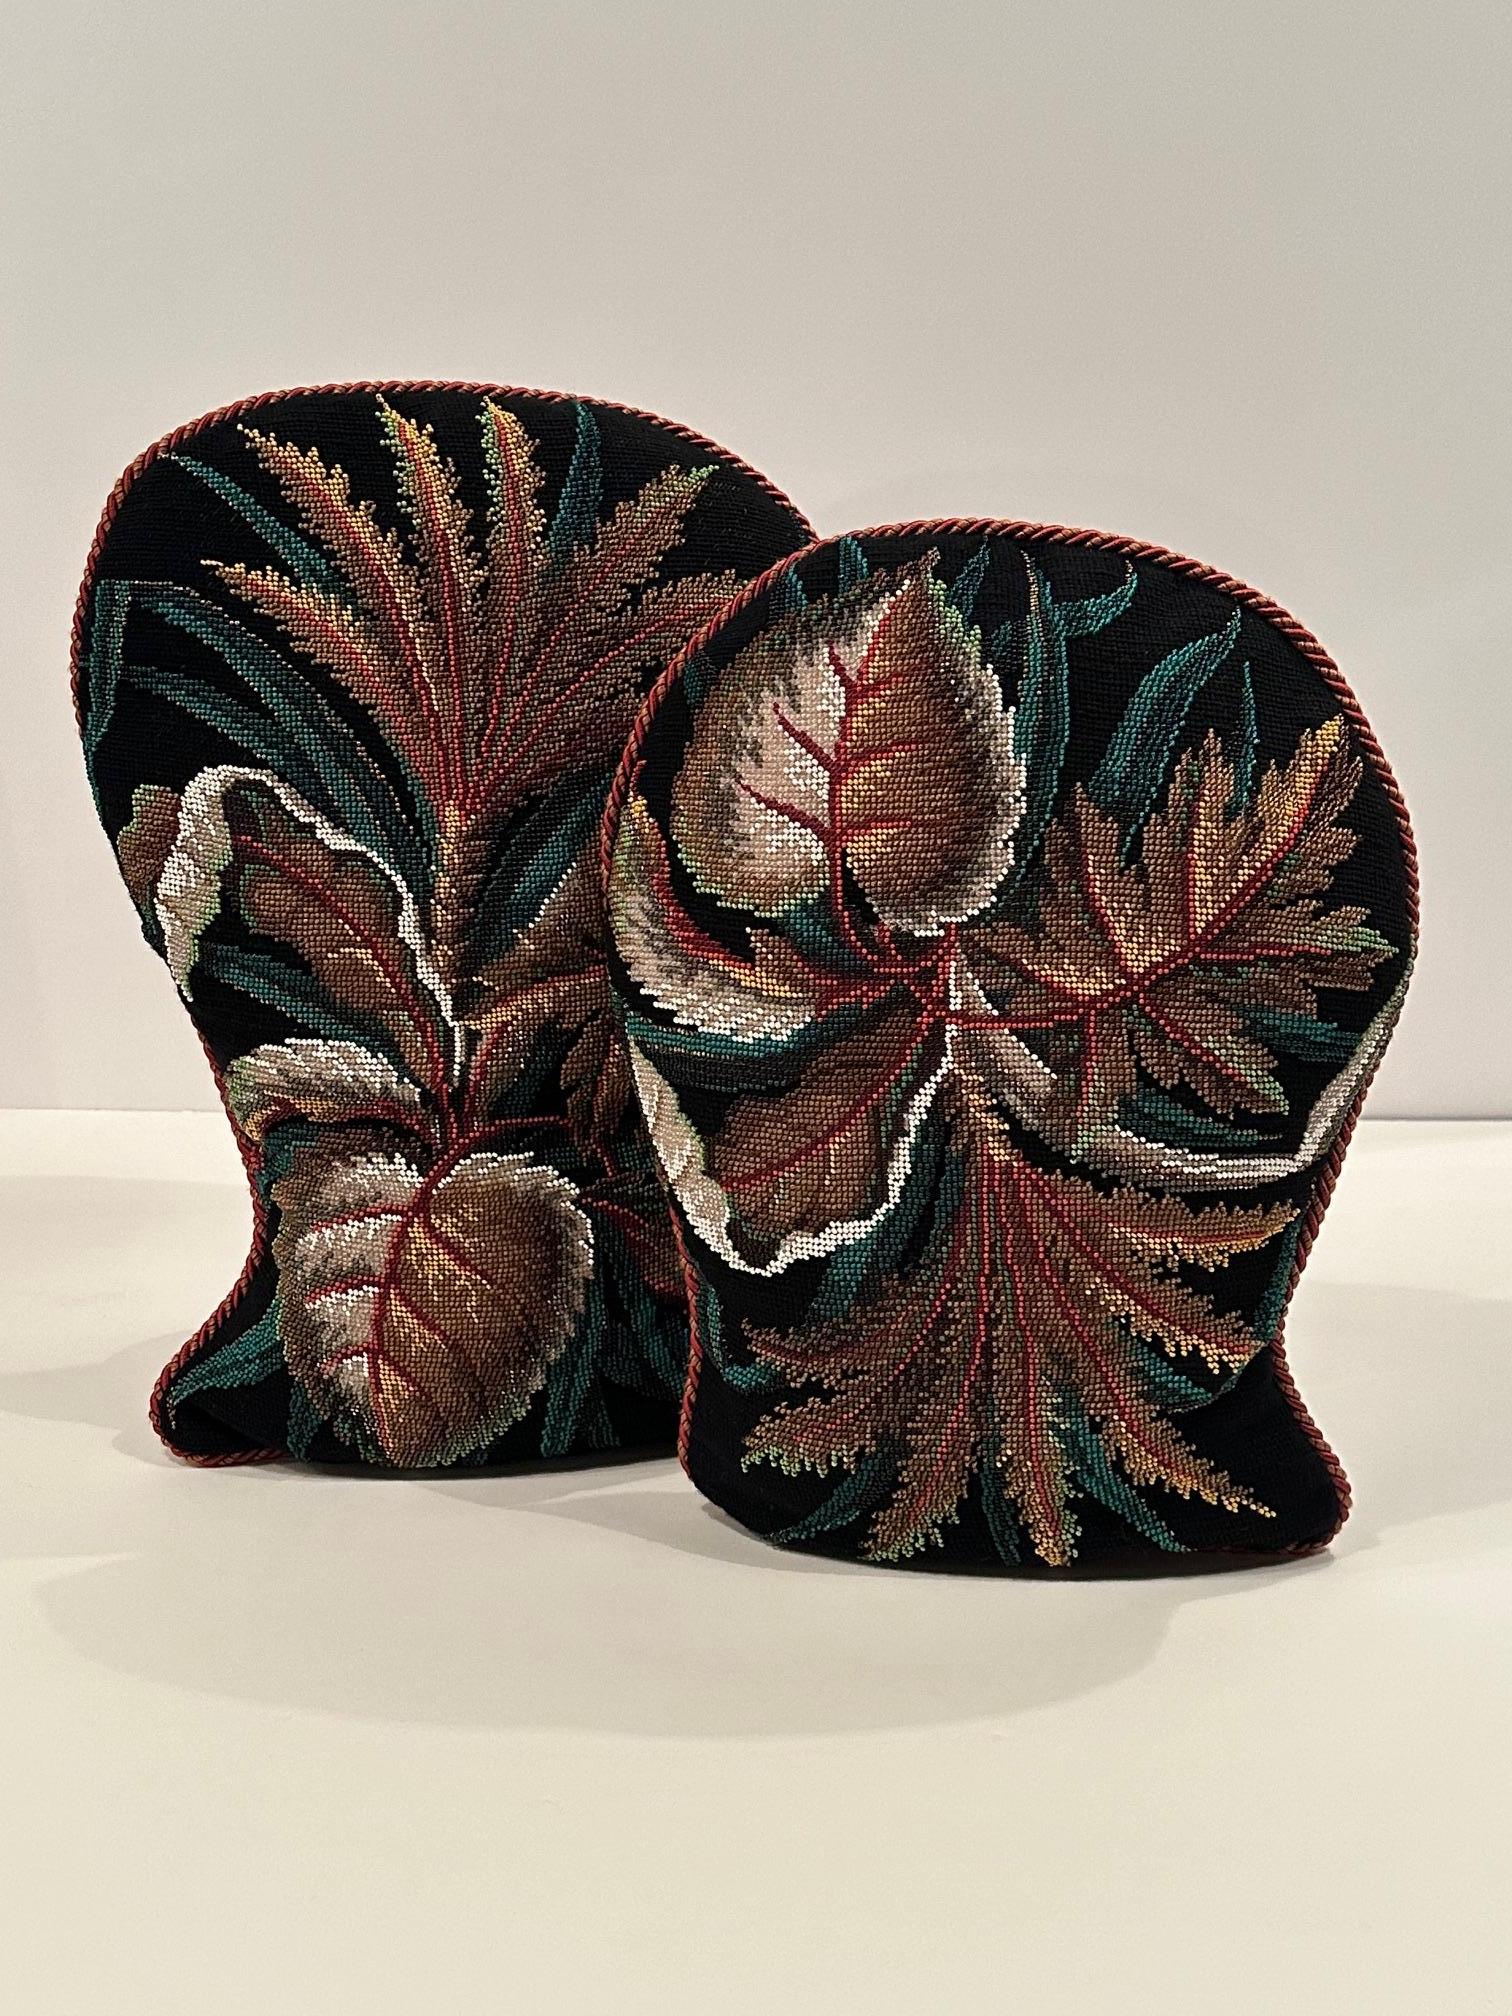 Unusual and beautiful custom pillows incorporating Victorian beadwork  with exquisite hand work.
Larger pillow 19 x 13 x 3
Smaller 17 x 13 x 3